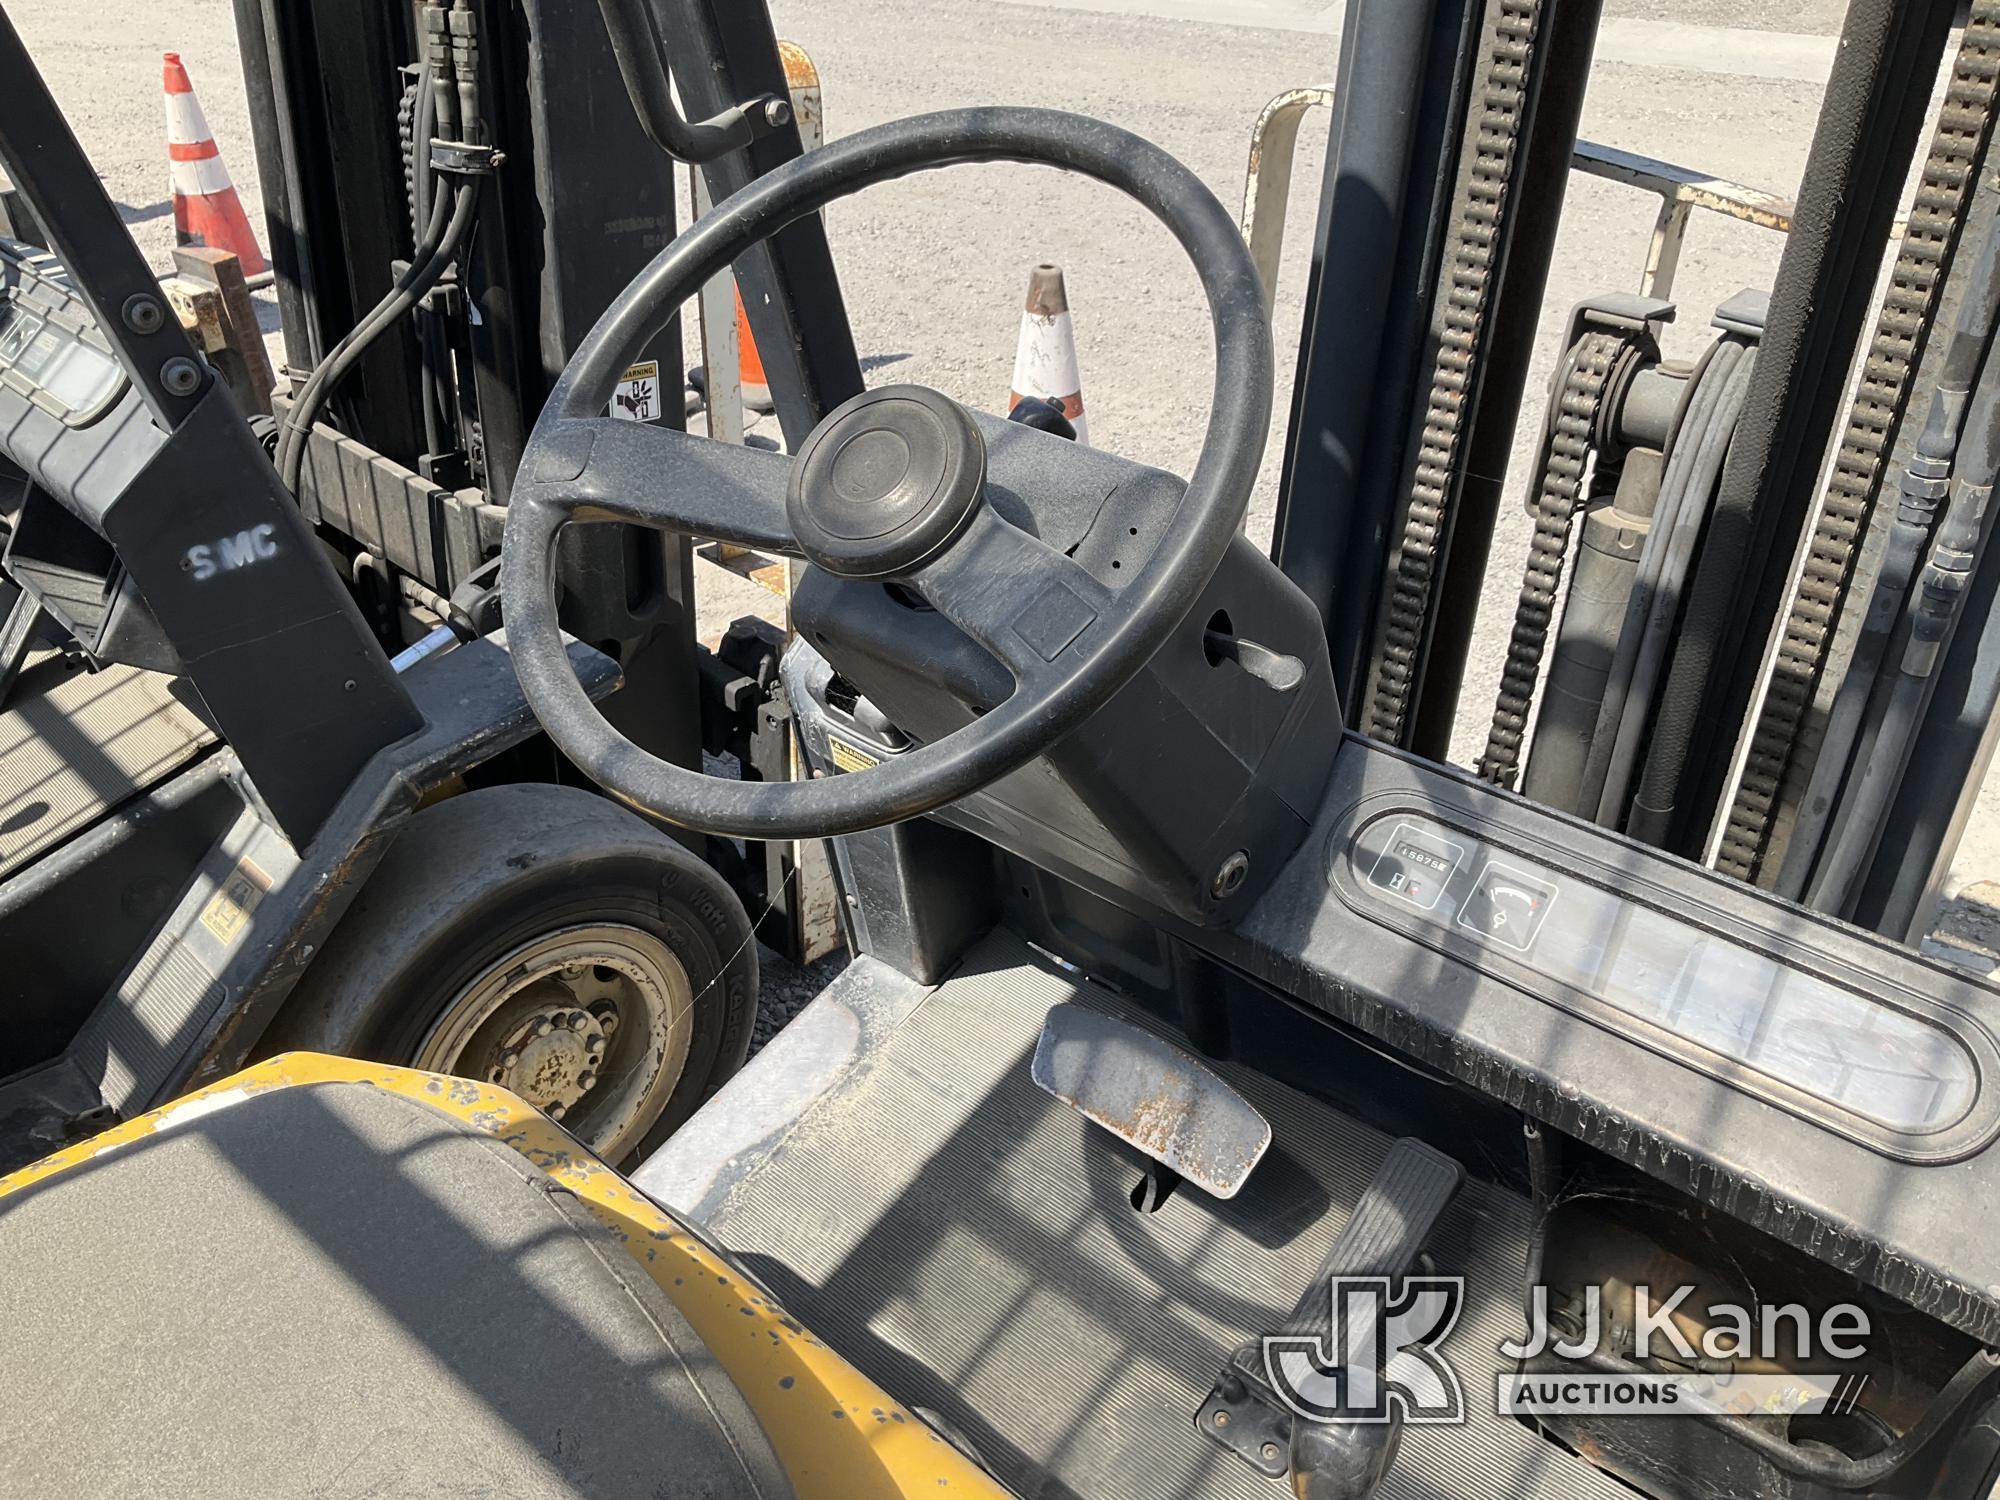 (Jurupa Valley, CA) Yale GLC030AFNUAE082 Solid Tired Forklift Bill of Sale Only, Not Running, Missin